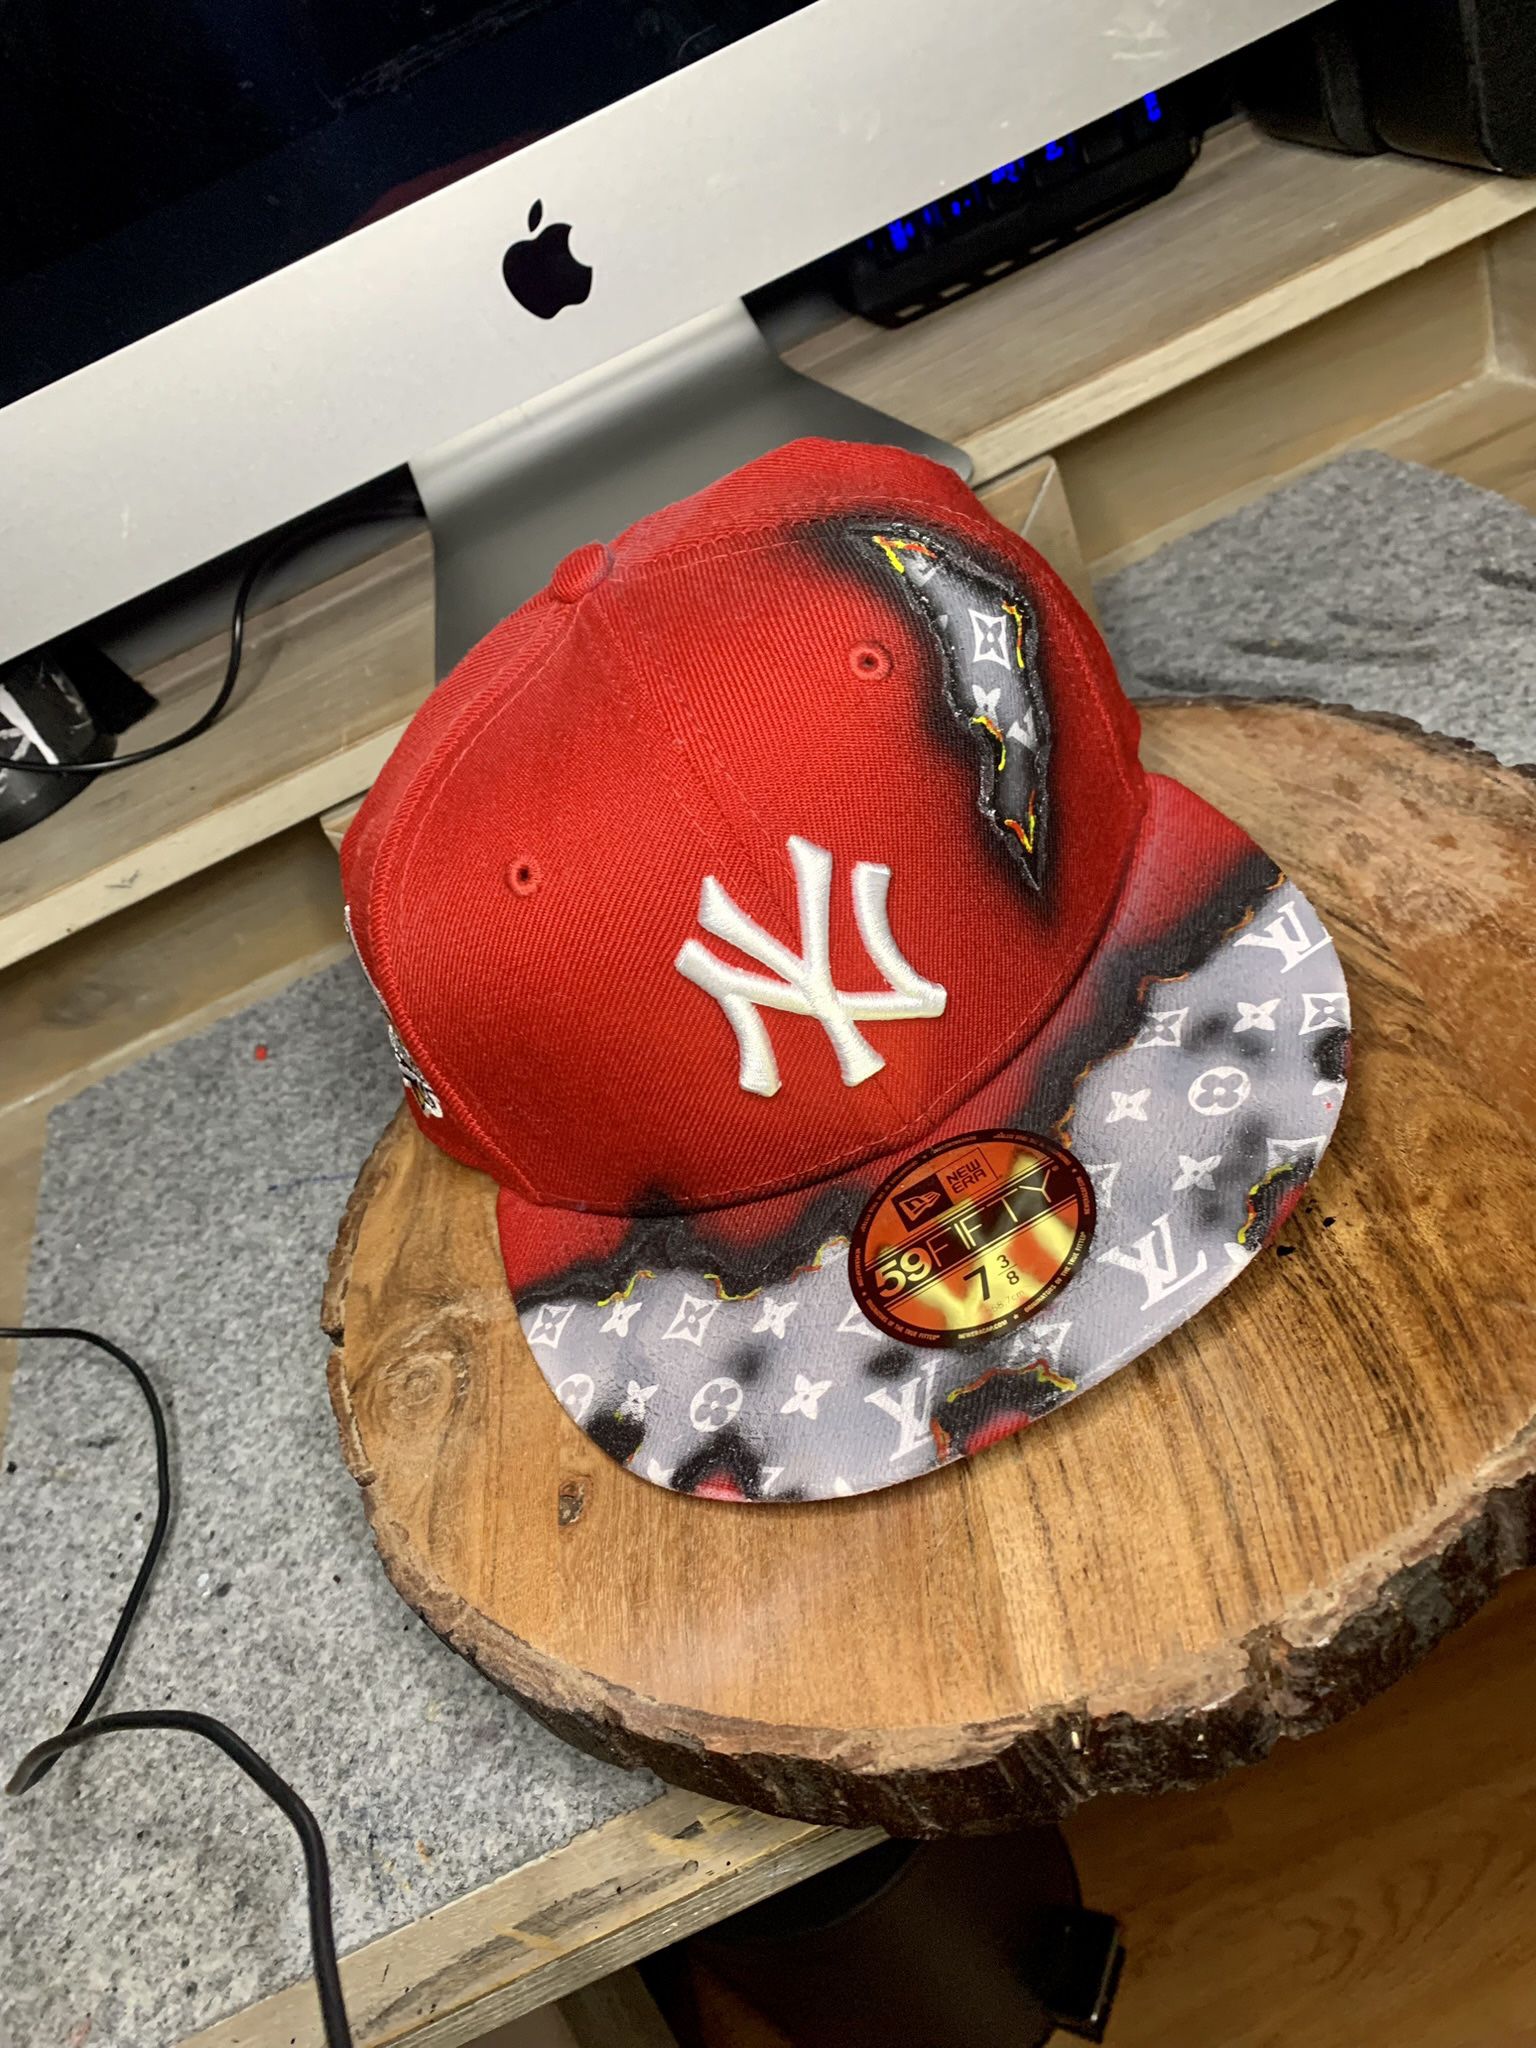 MONCLER Hat Looking To Trade For Lv Hat for Sale in New York